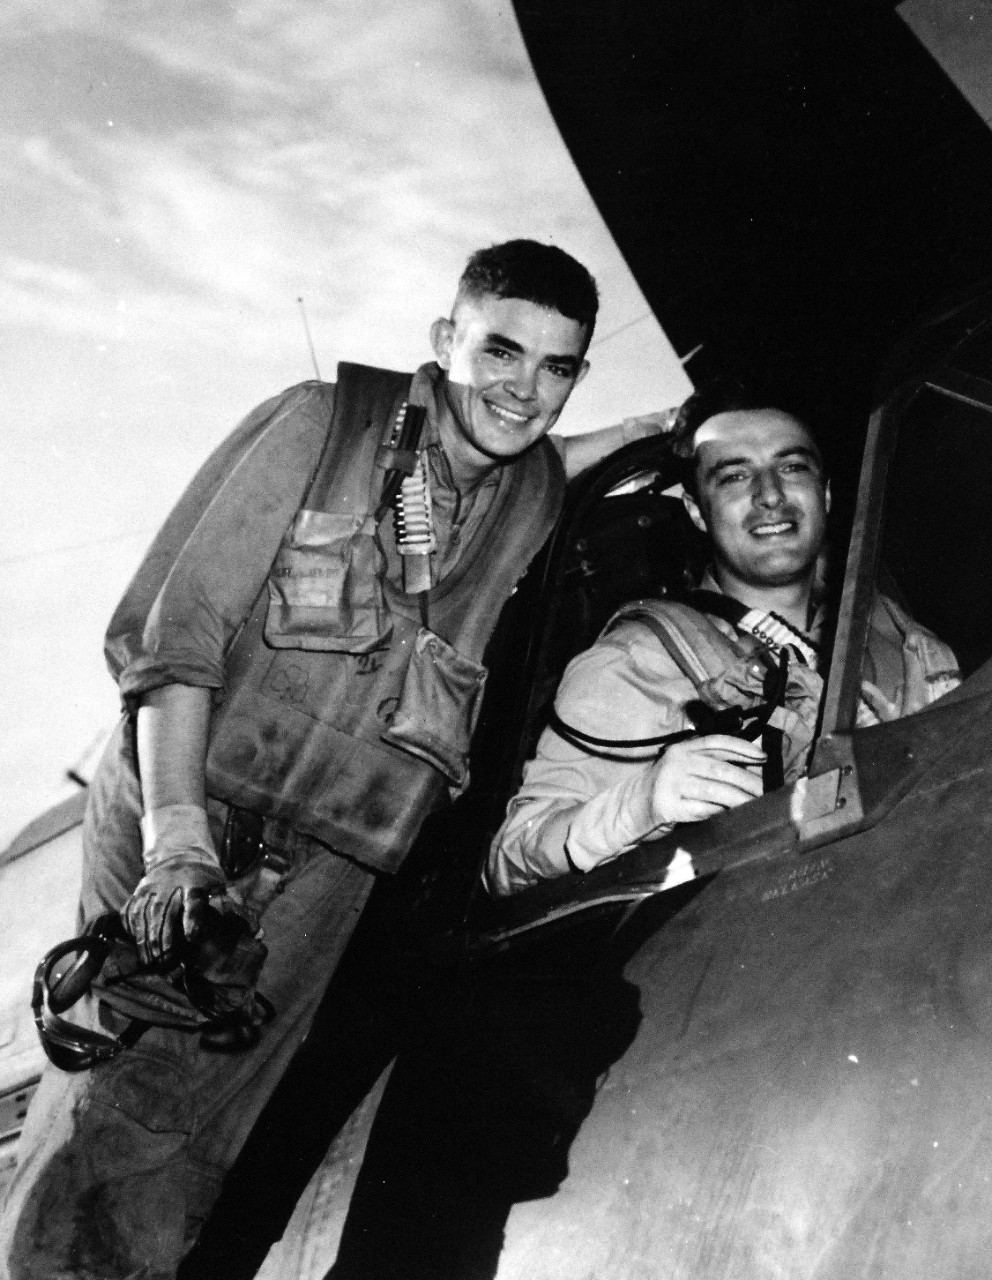 80-G-285084: Battle of the Sibuyan Sea, October 24, 1944.   Lieutenant Commander Arthur L. Downing and ARM2 John L. Carver following their return to carrier after successful bombing of Japanese battleship Yamato during the Battle of Leyte Gulf. In an SB2C, they dropped two bombs just forward of No.1 gun turret, going in through intense anti-aircraft fire at low altitude.  Left to right:  ARM2C Carver and Lieutenant Commander Downing.  This bombing was probably from aircraft based onboard USS Essex (CV-9).   Yamato was later sunk by U.S. Navy aircraft on April 7, 1945.   Photograph released October 25, 1944.  U.S. Navy photograph, now in the collections of the National Archives.  (2016/03/15). 